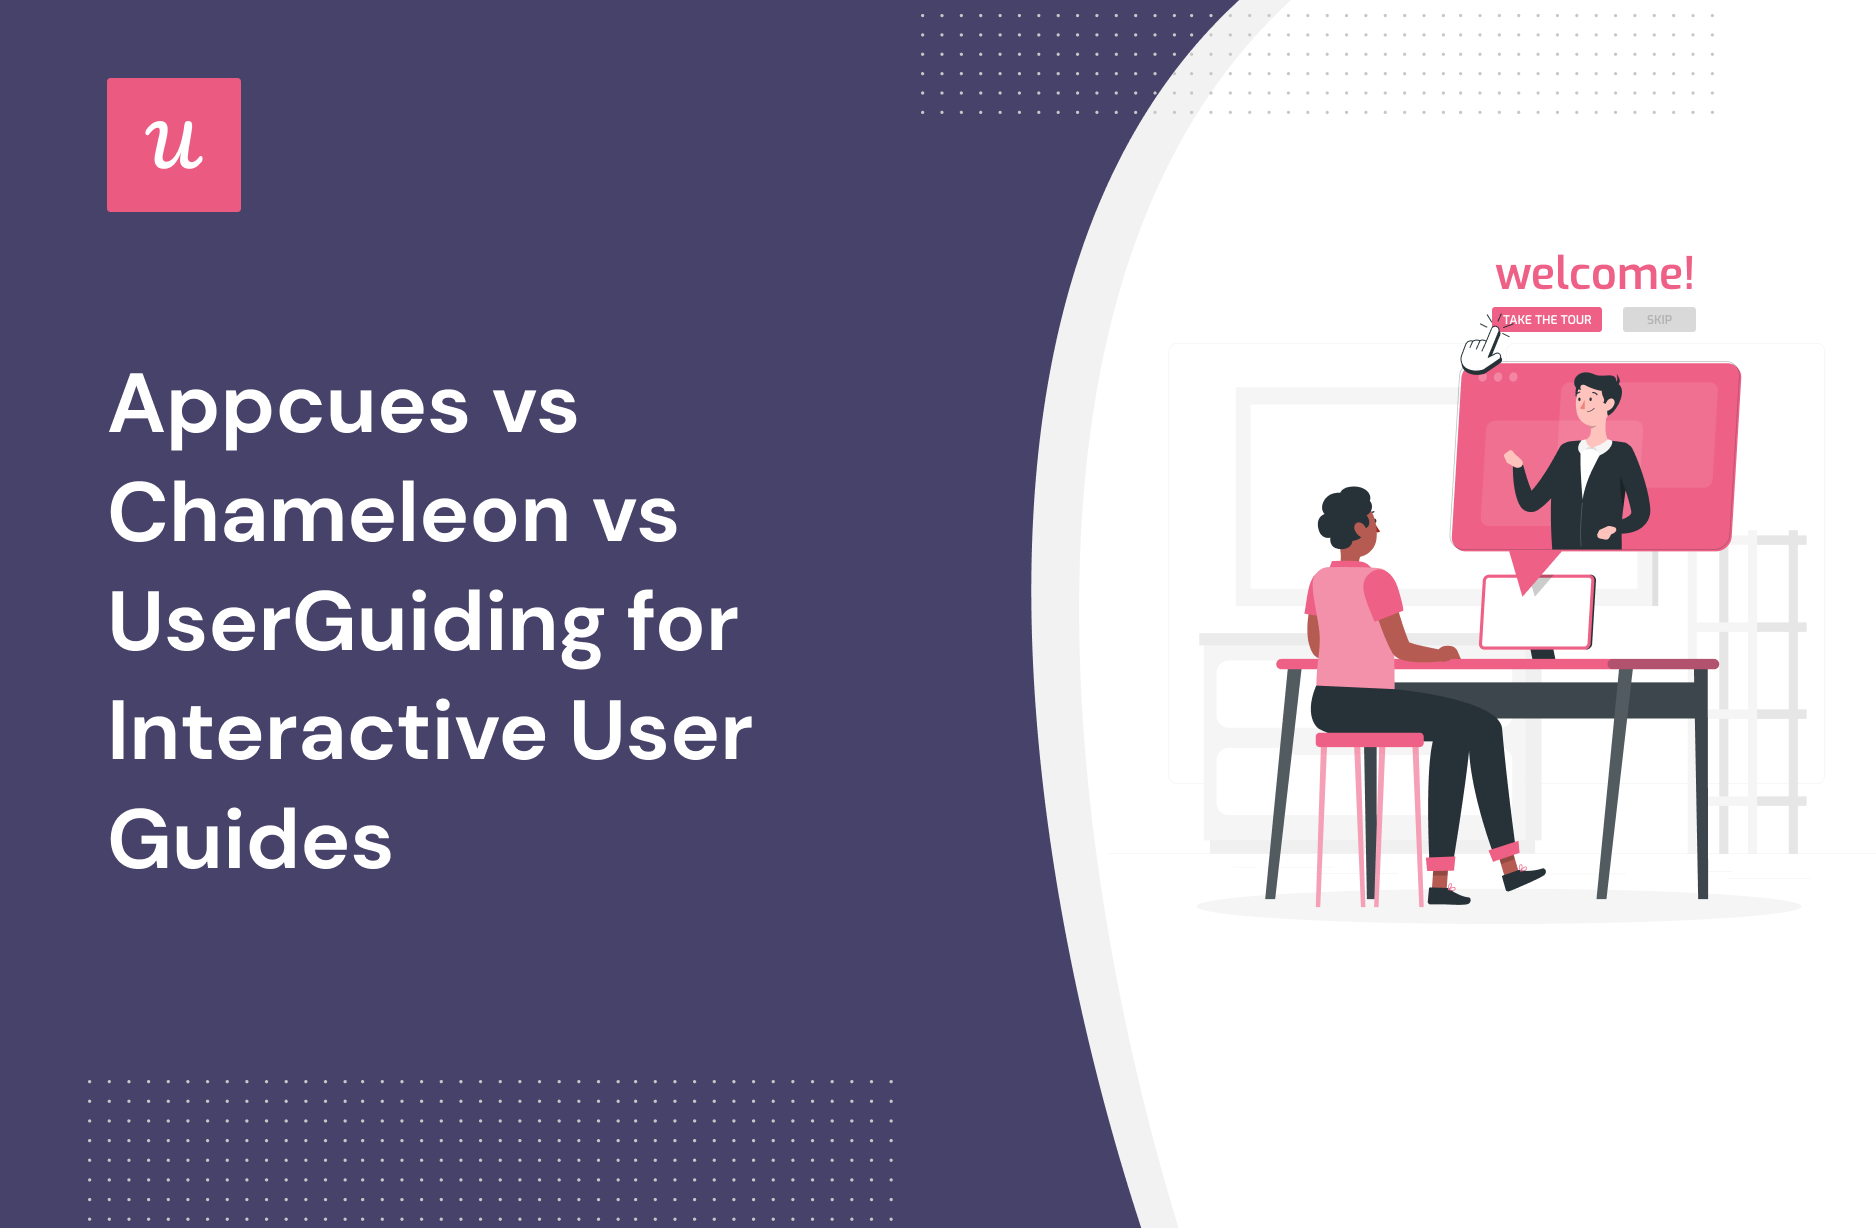 Appcues vs Chameleon vs UserGuiding for interactive user guides